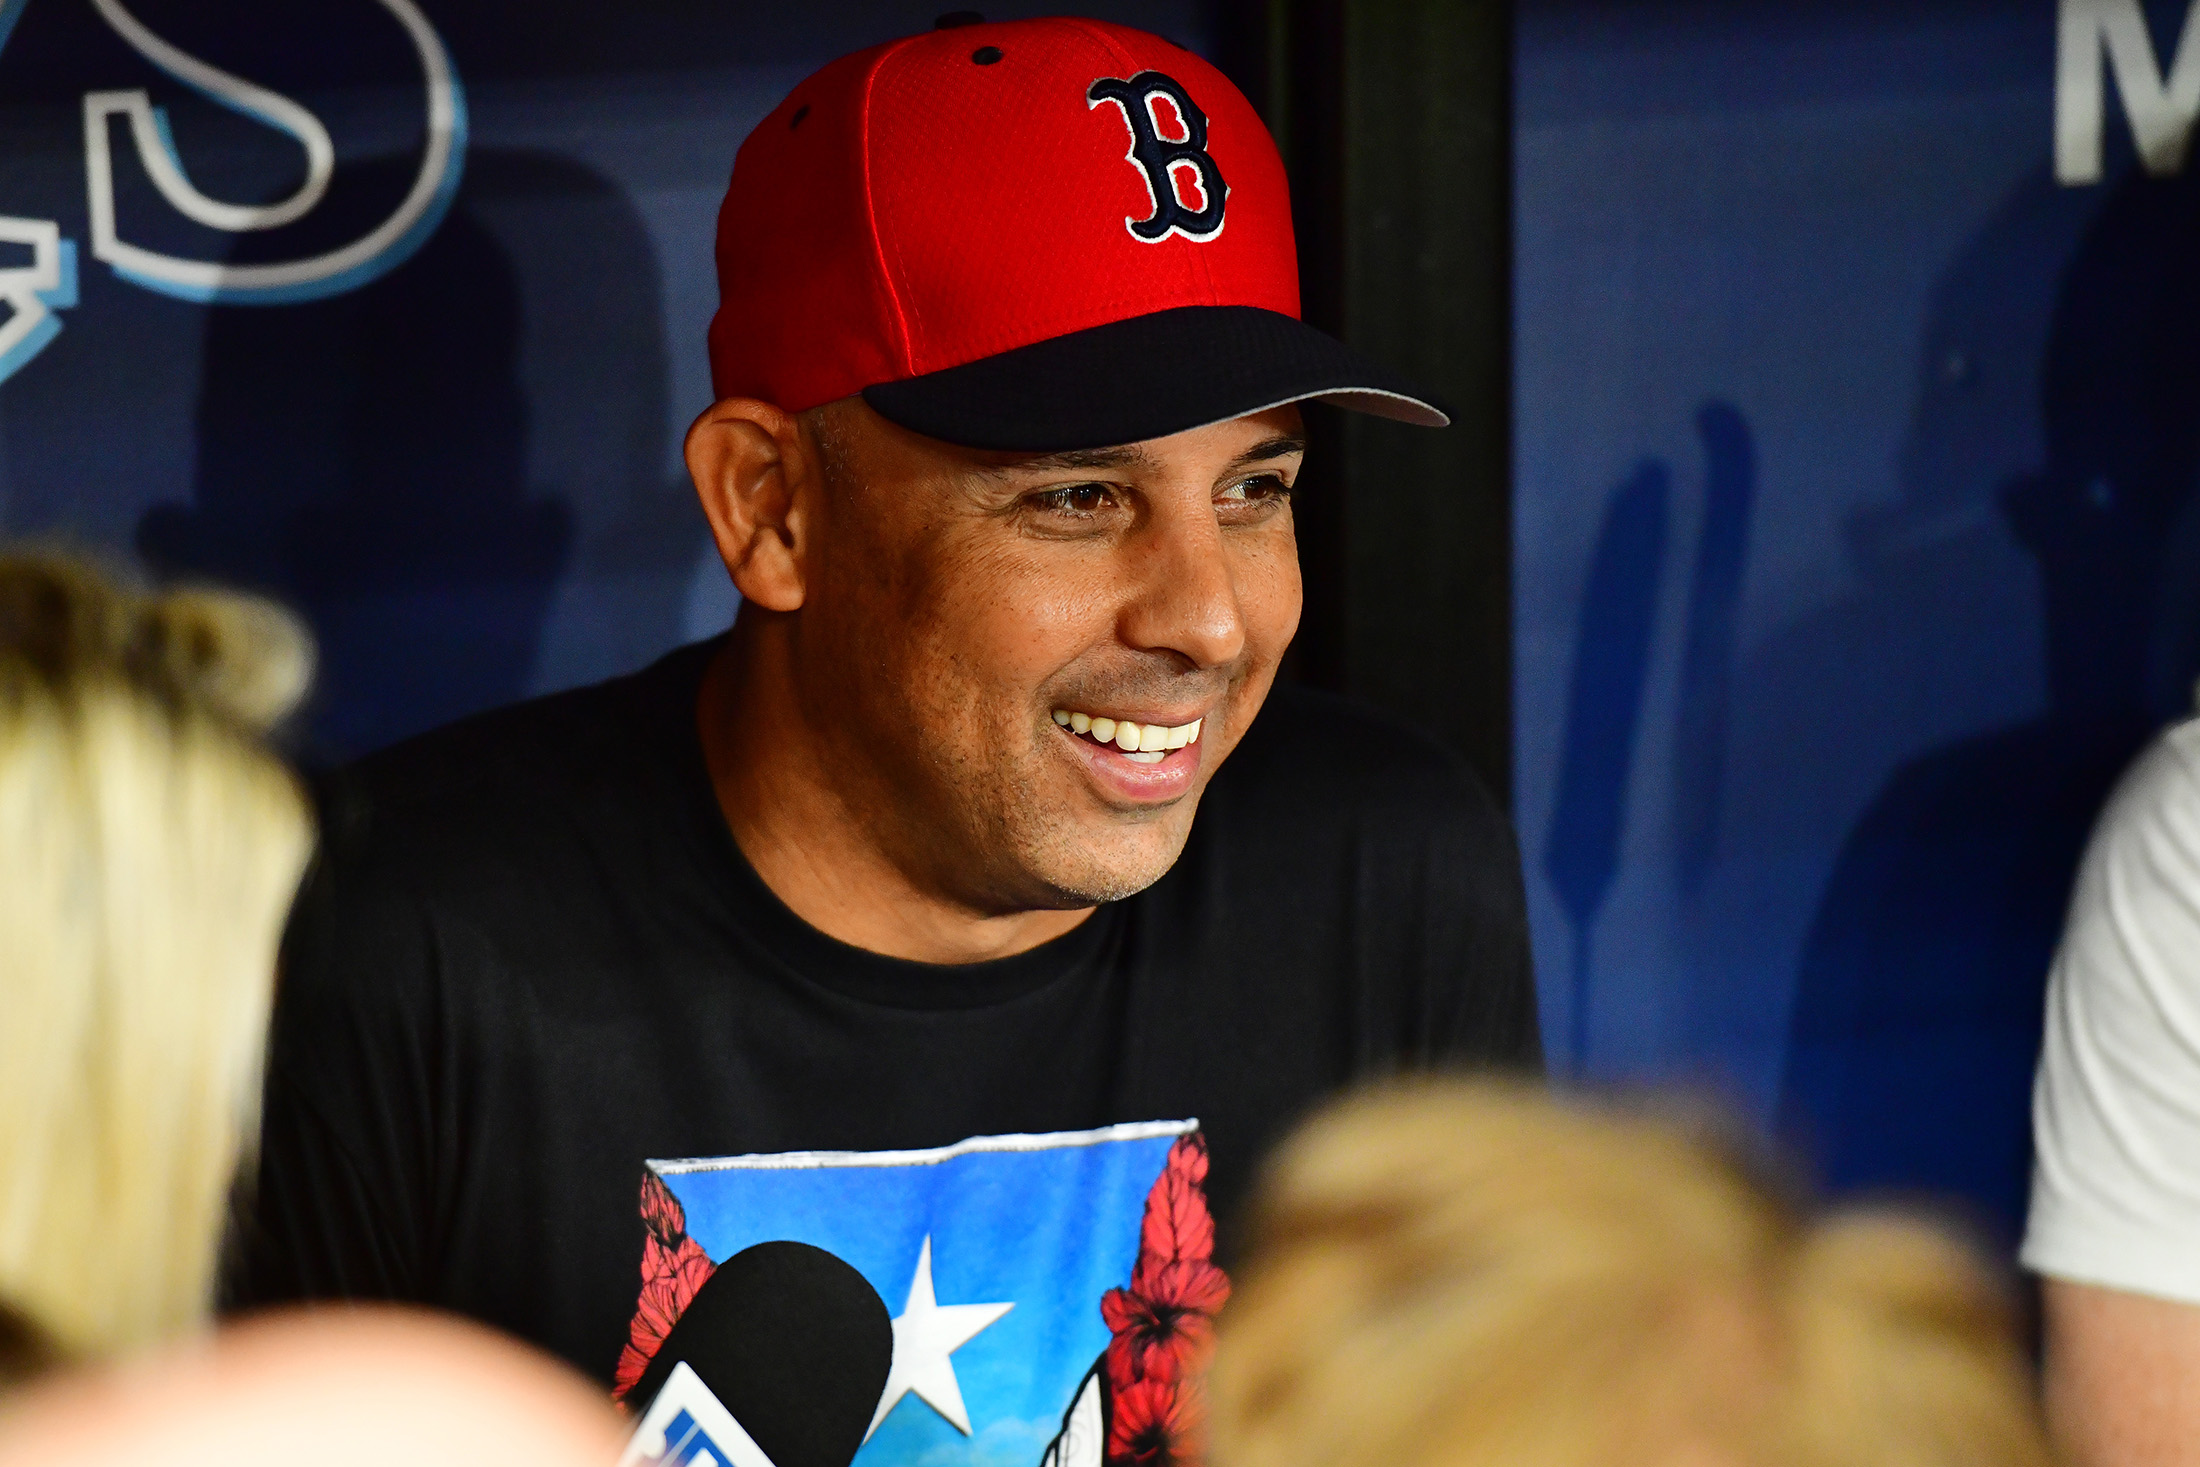 Alex Cora, Boston Red Sox manager, learned to lead from dad who